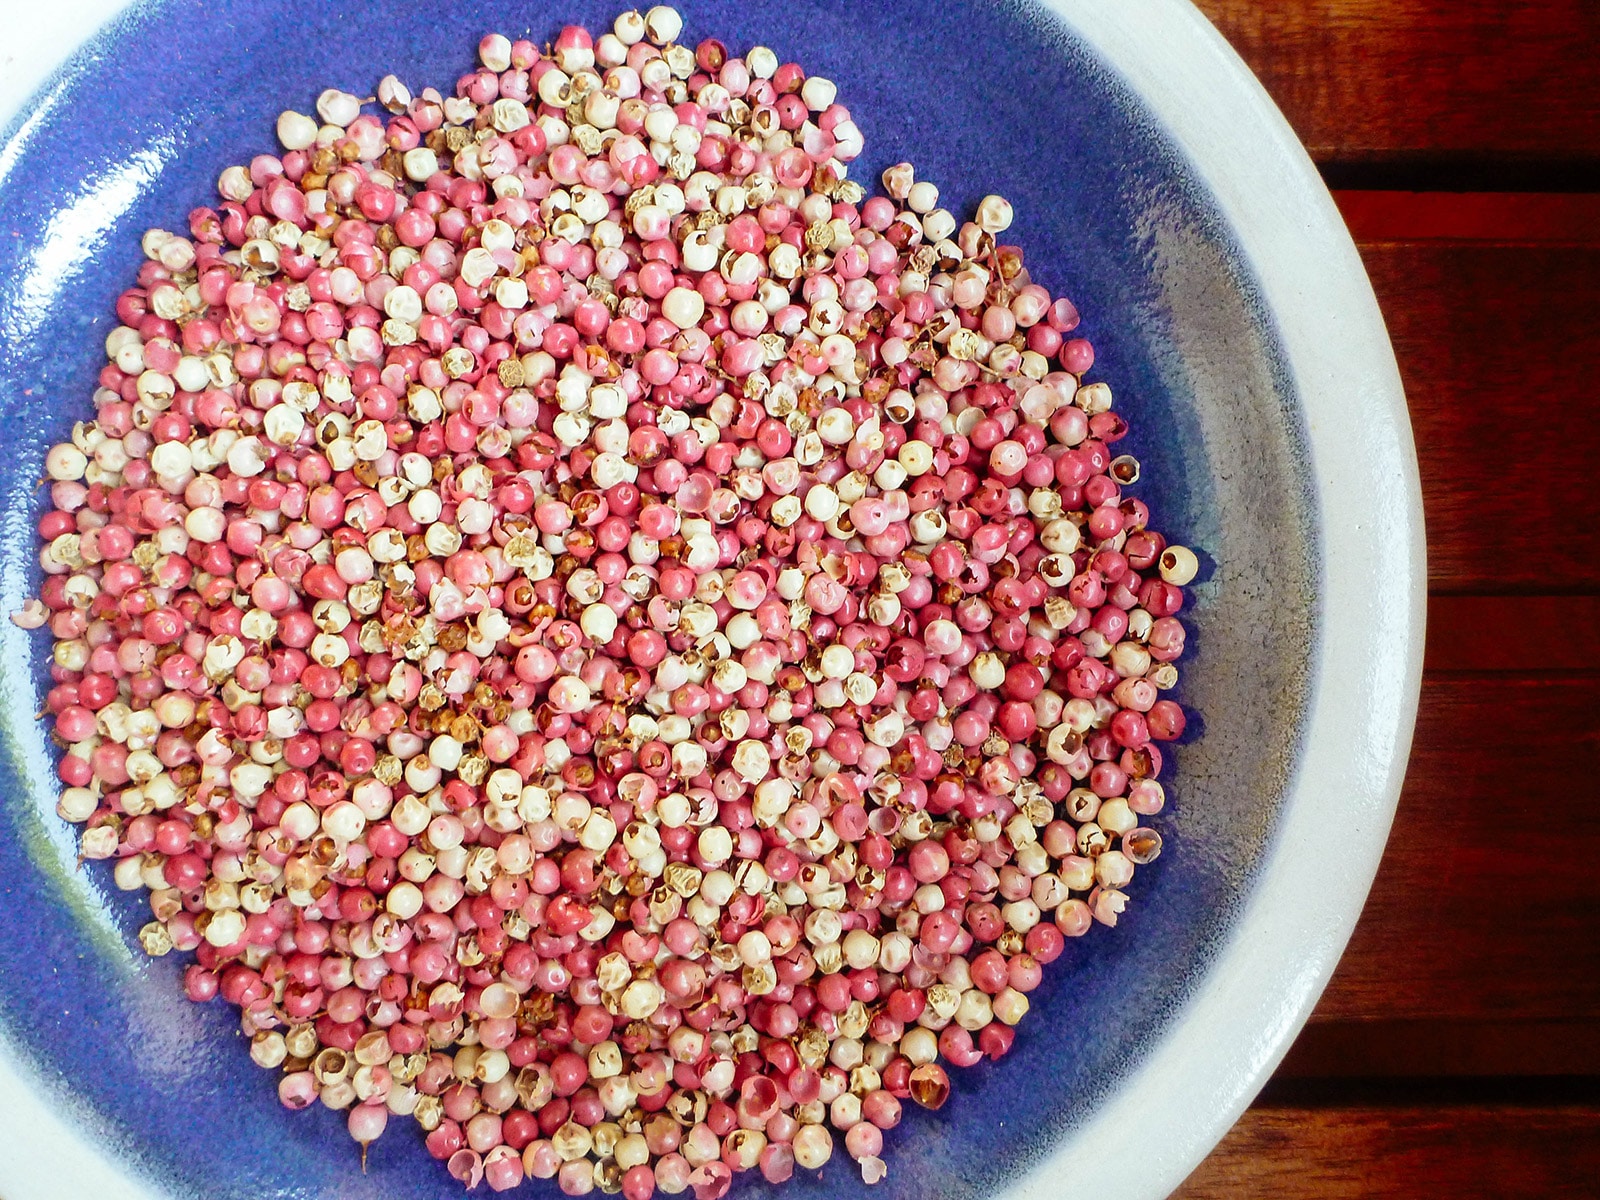 Foraged pink pepper tree berries drying on a blue plate